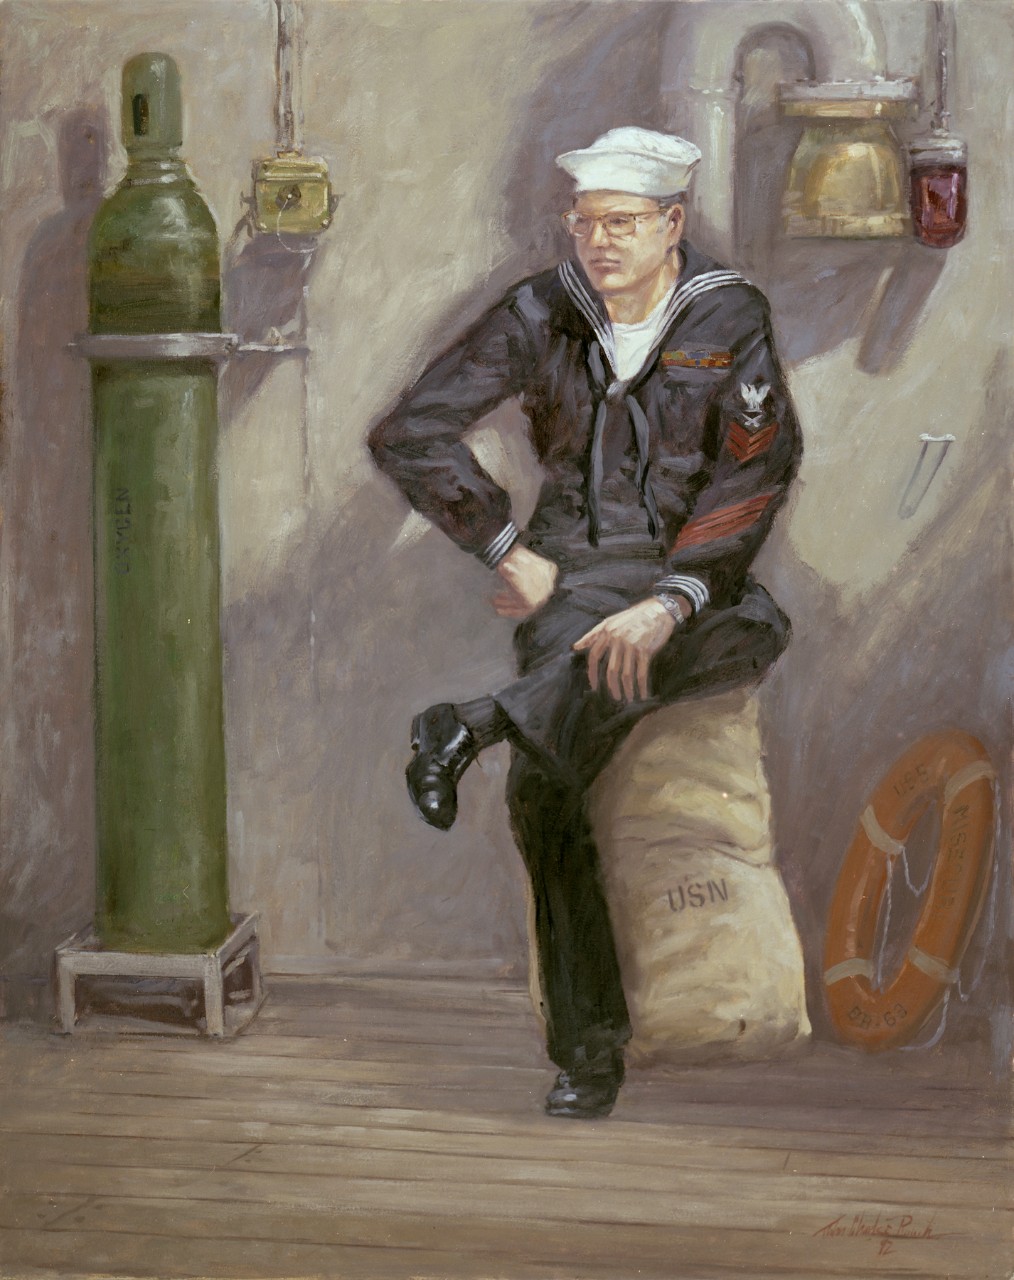 A sailor is seated on a full canvas bag he is leaning against the side of the ship